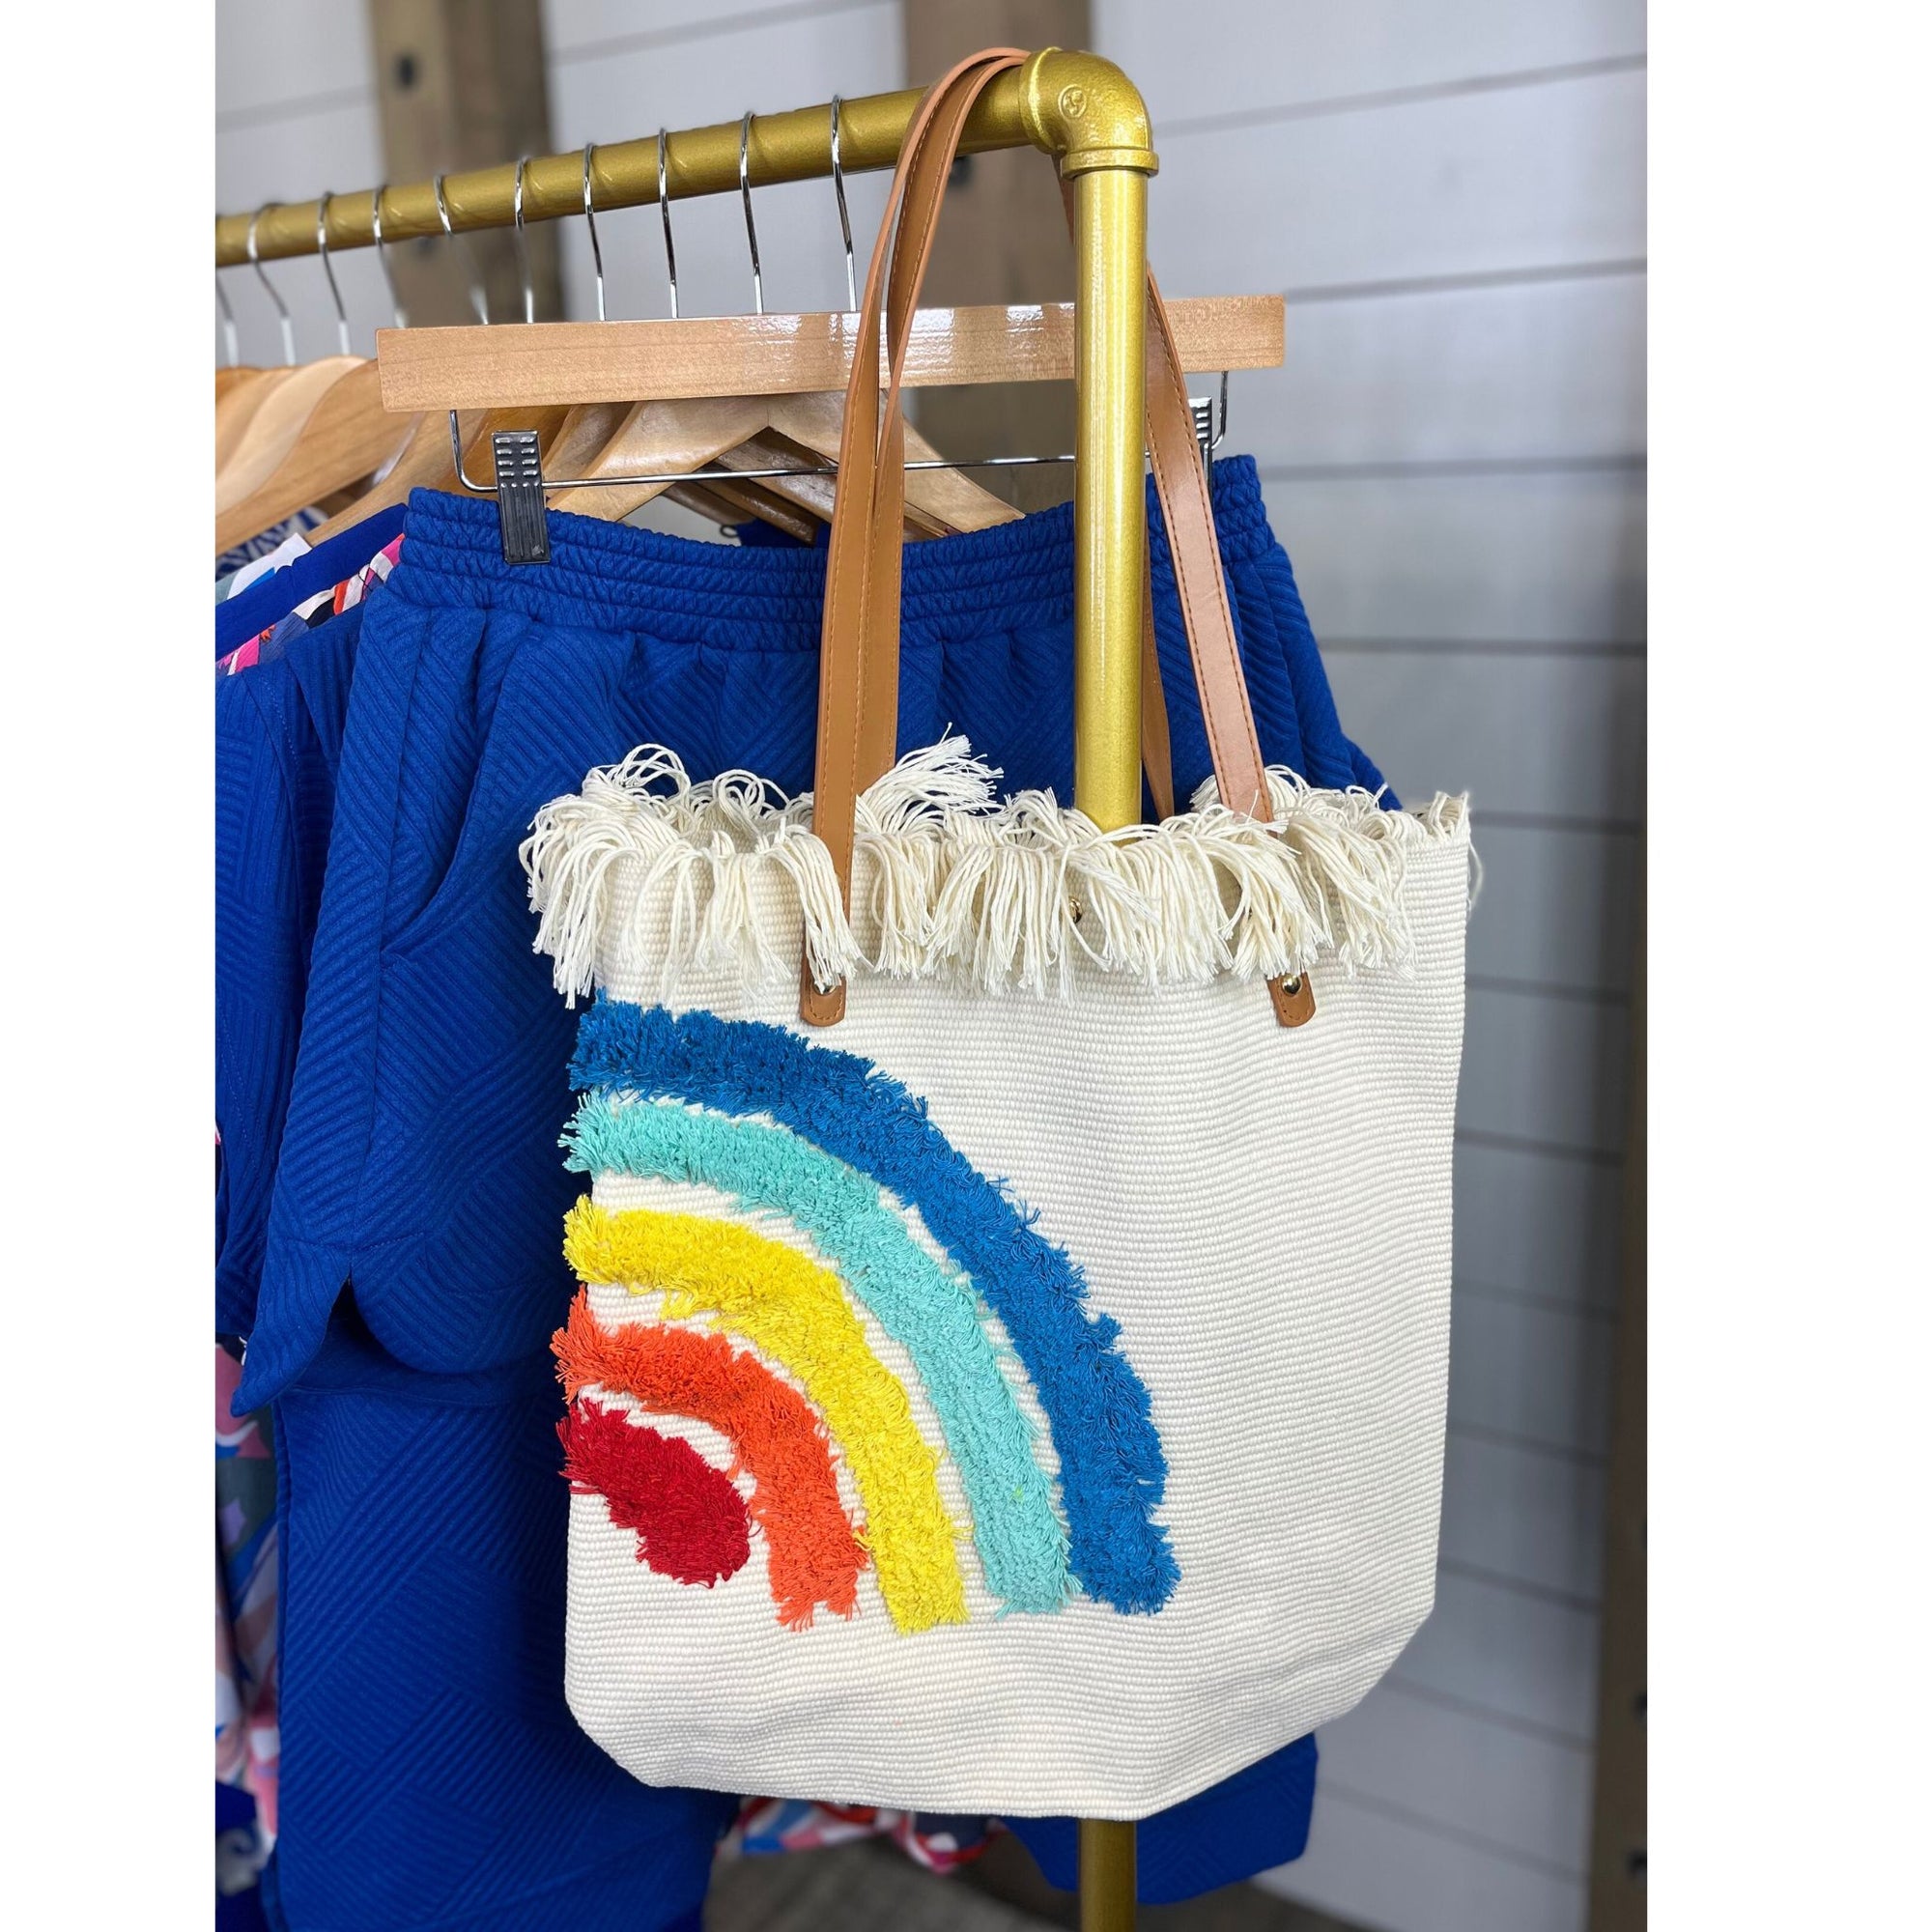 Pot Of Gold-Woven Straw Rainbow Embroidered Tote Bag